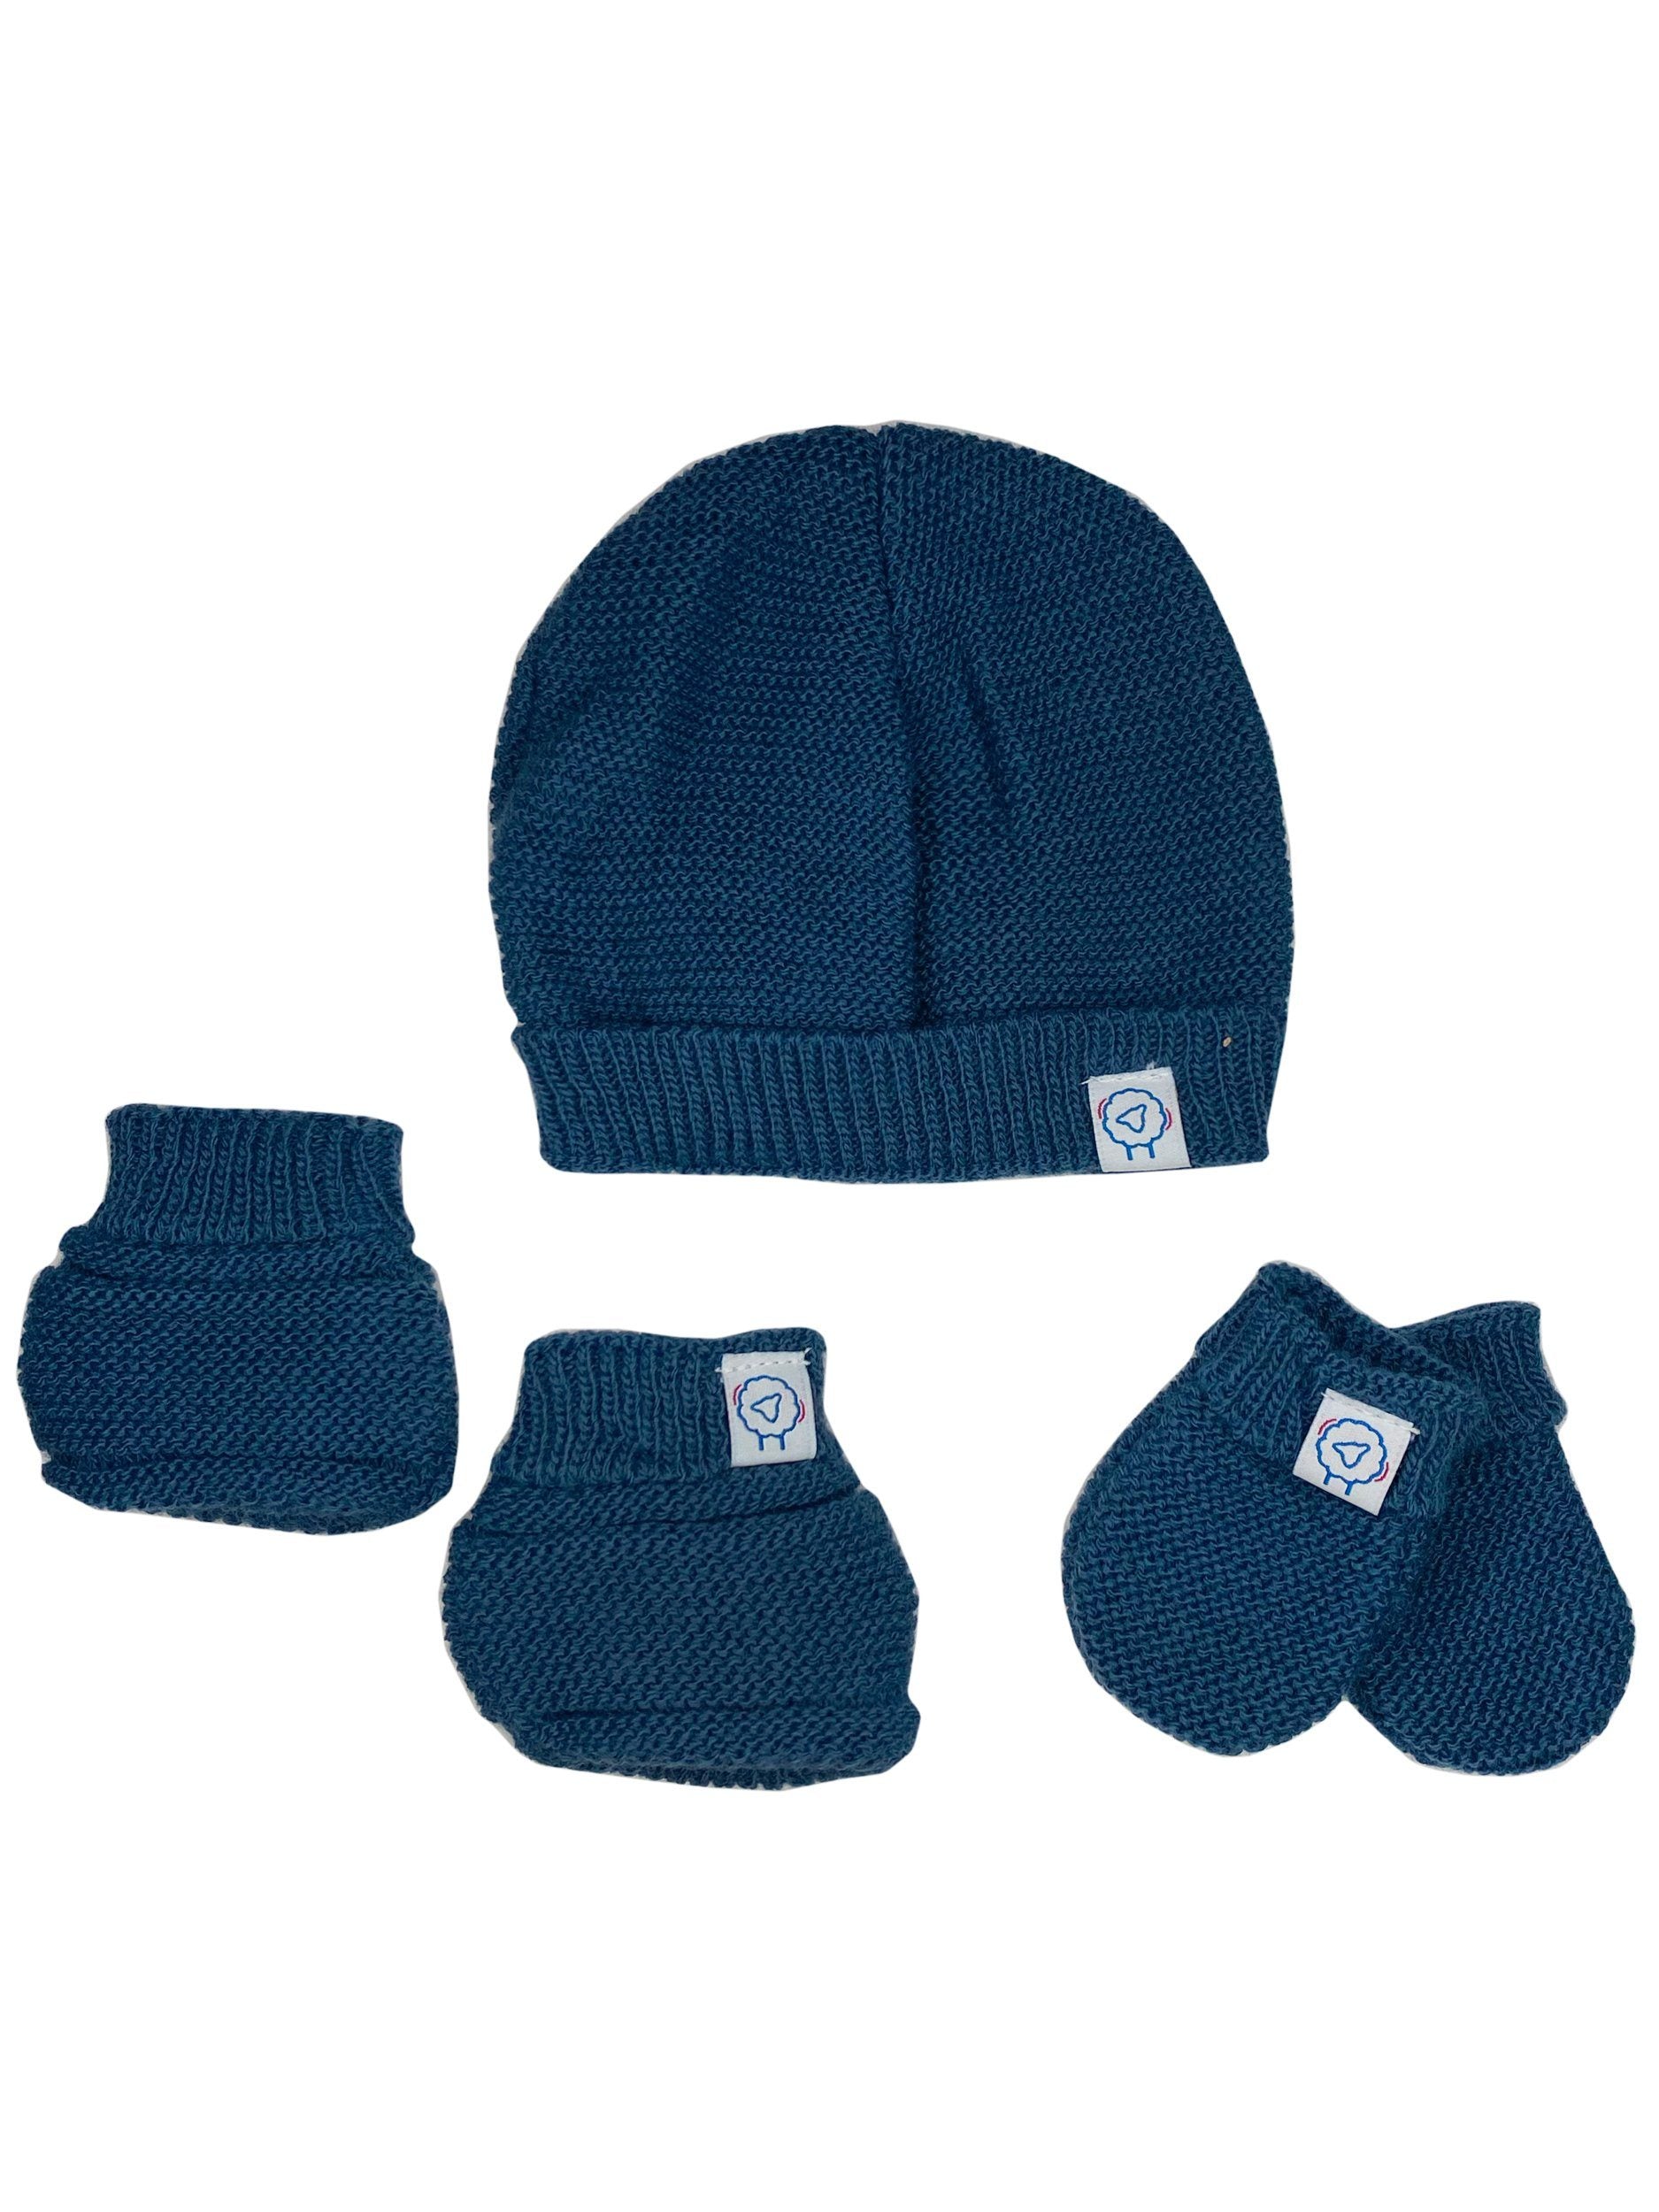 Knitted Hat, Mittens & Booties Set - Midnight Blue Hat, Mitts & Booties Set La Manufacture de Layette 